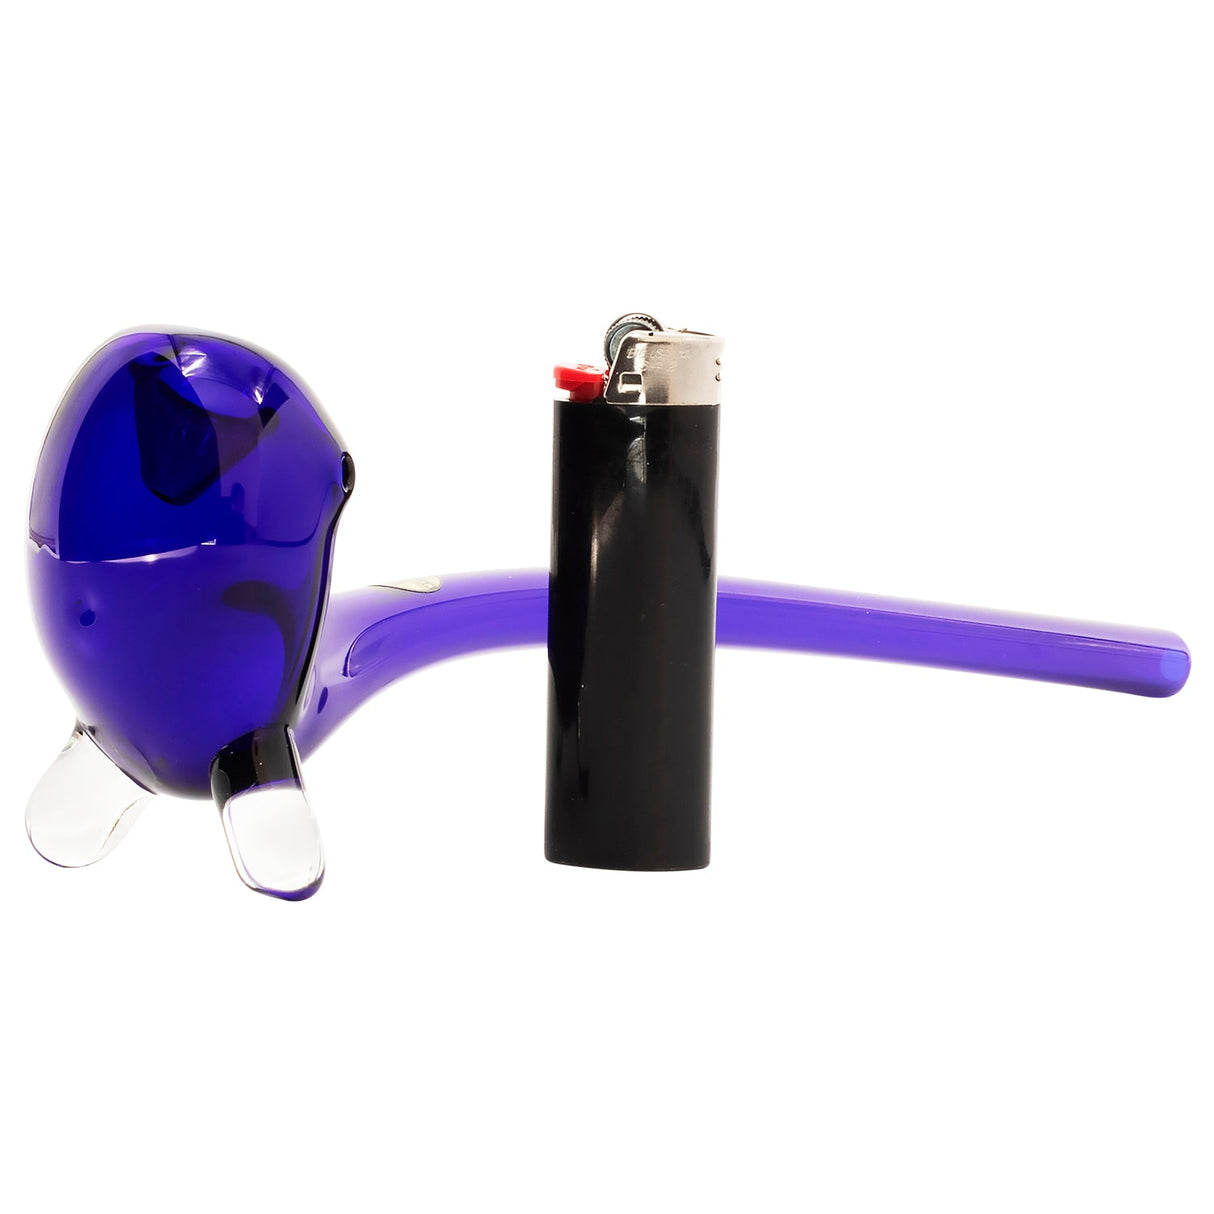 LA Pipes "The Gandalf" Pipe in purple borosilicate glass, 10" length, side view with lighter